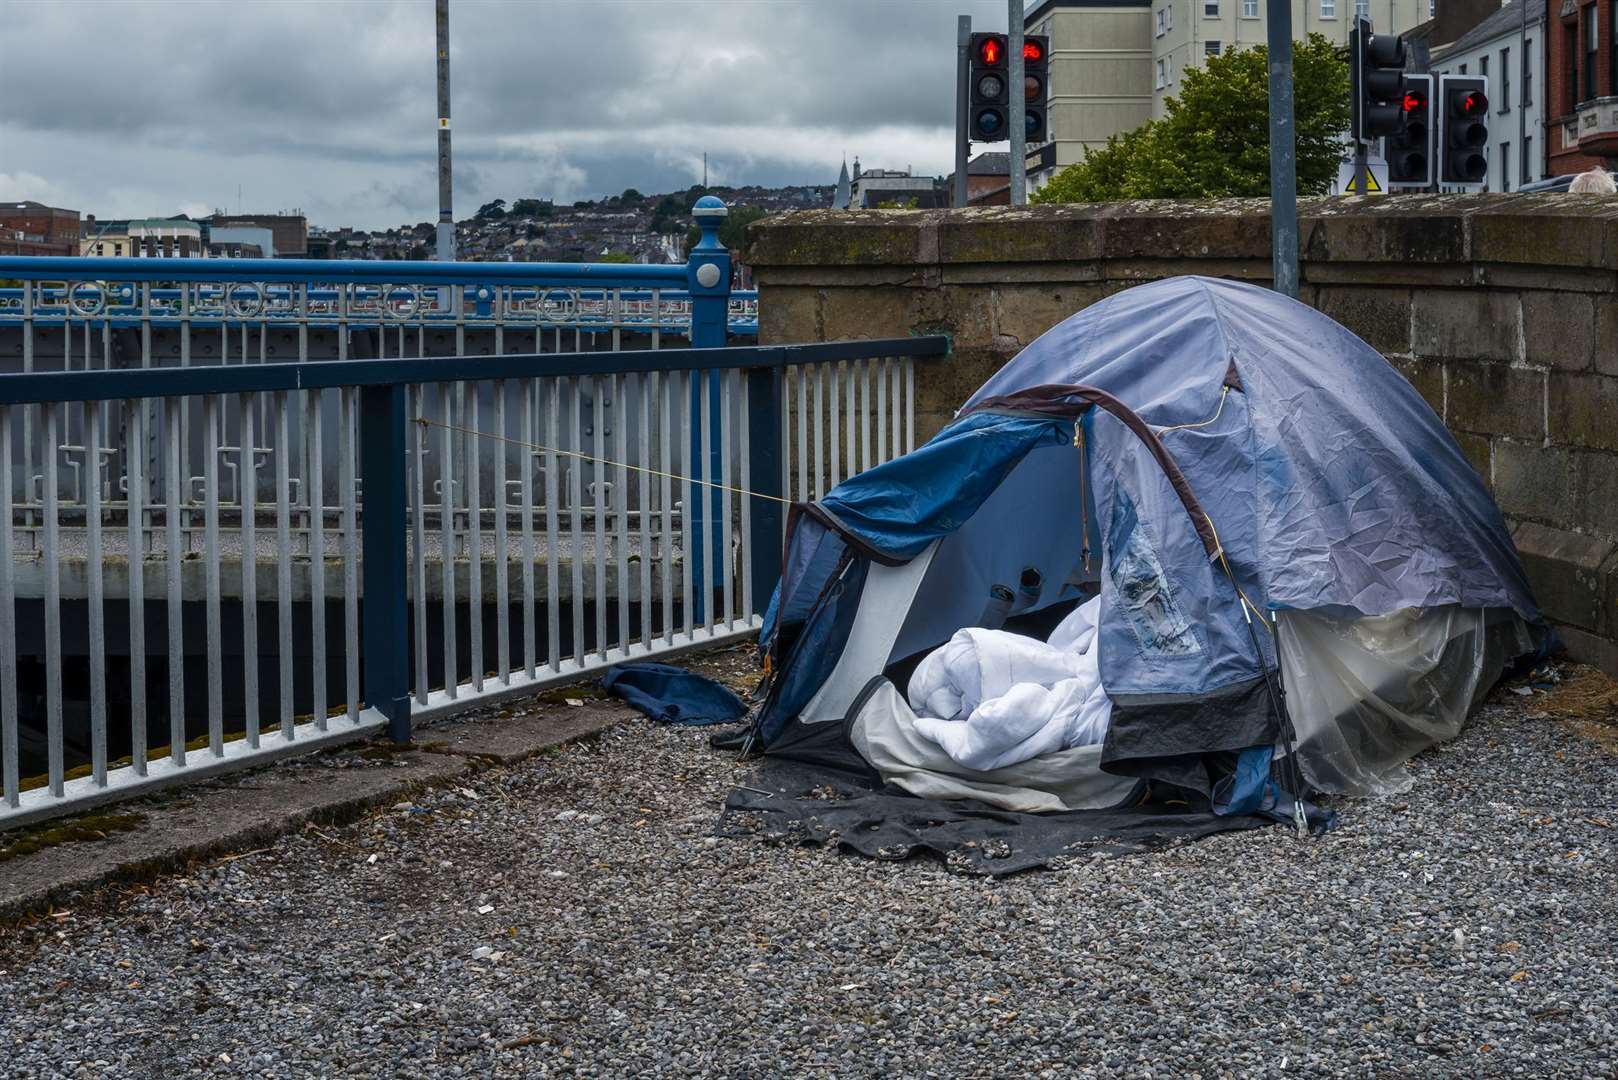 Homelessness has risen sharply in Maidstone. Picture: iStock